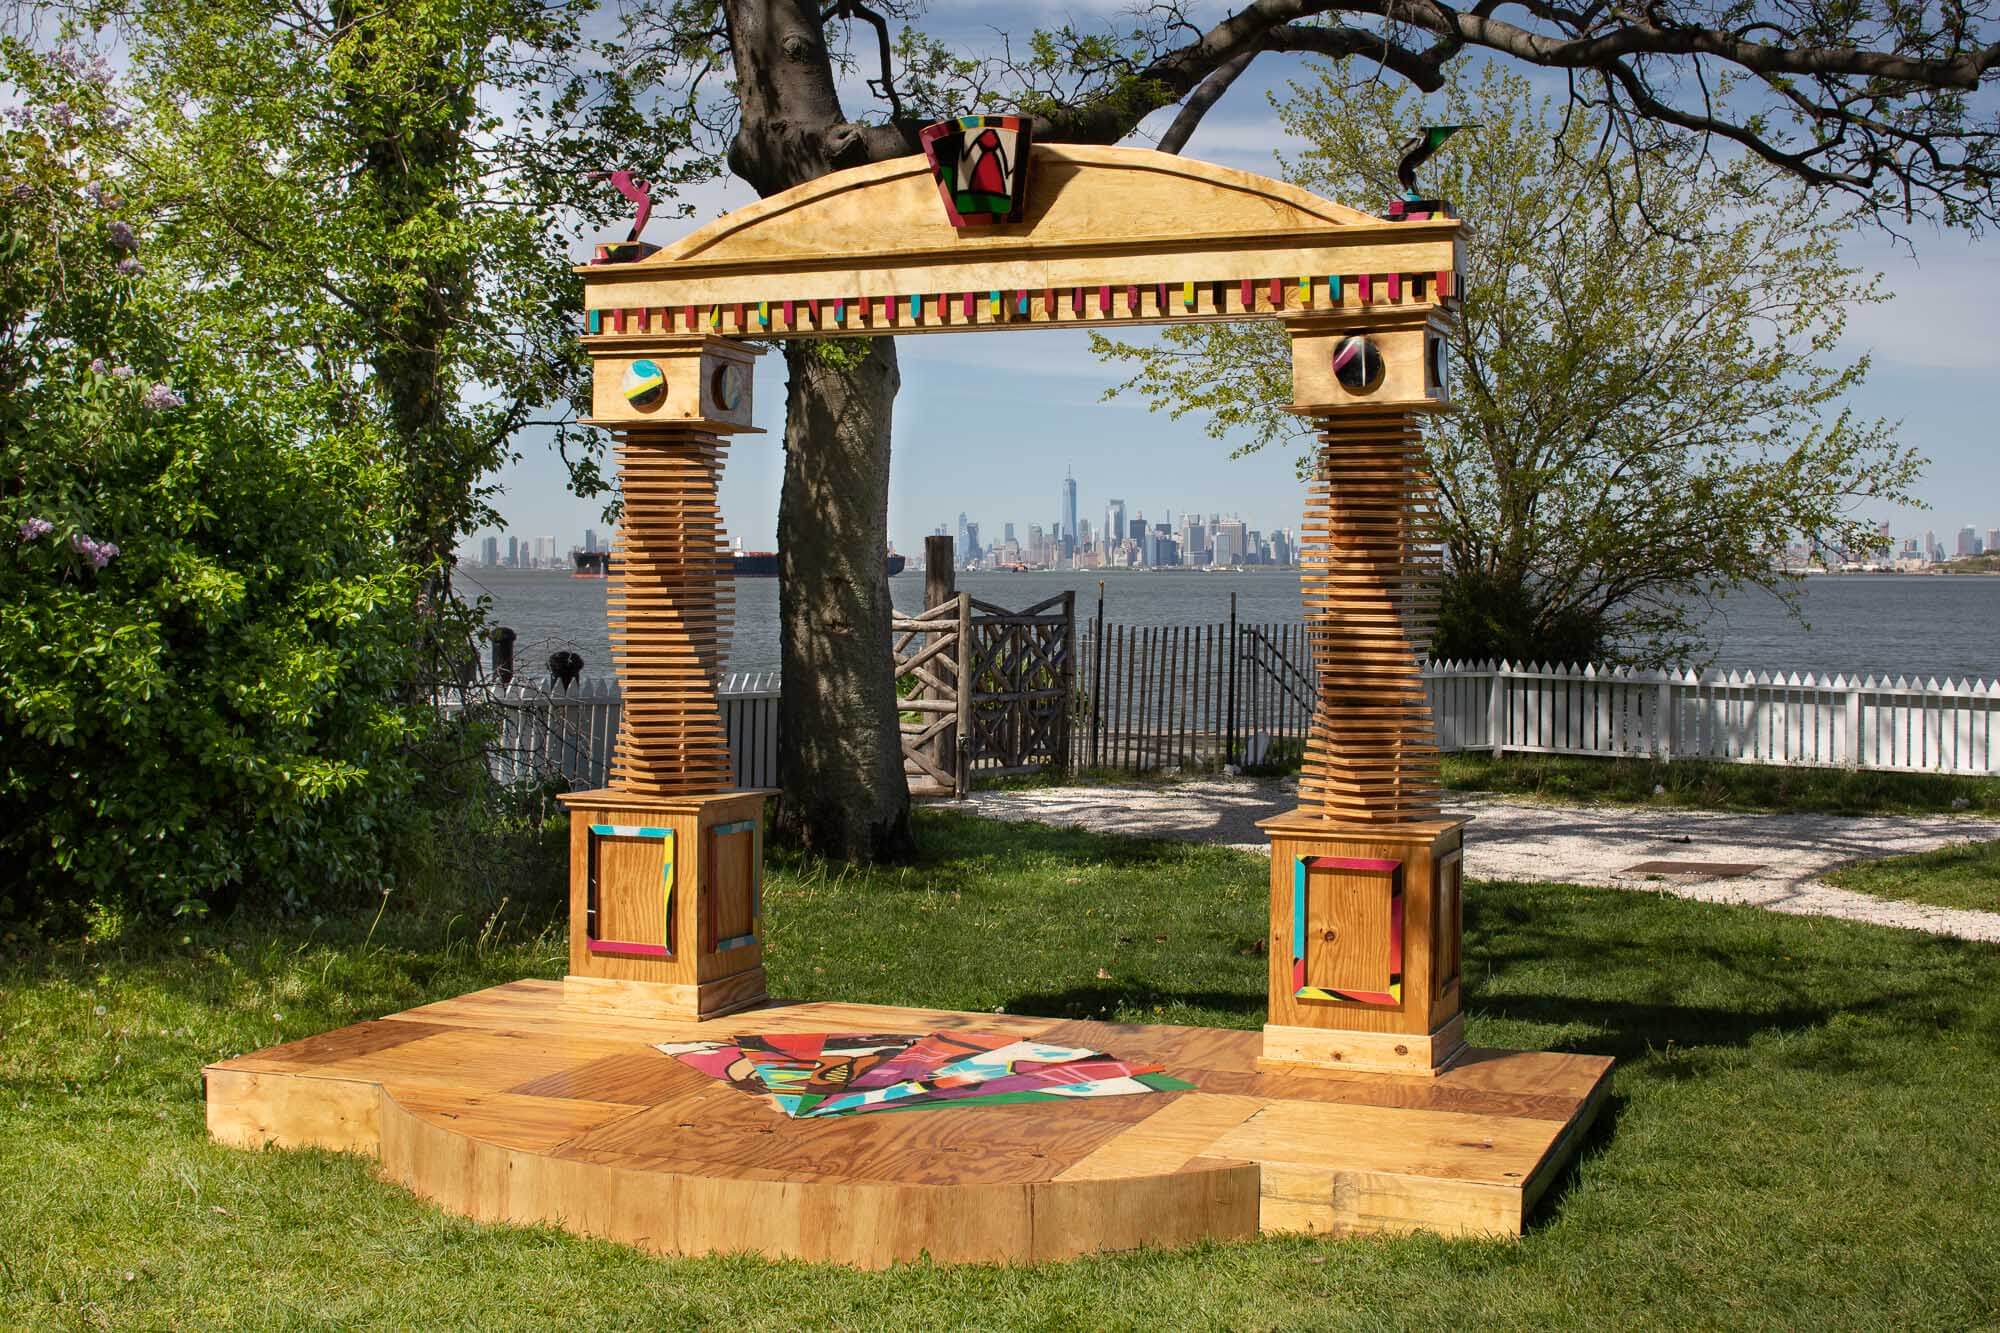 a small hand-crafted performance stage crafted from plywood in a city park